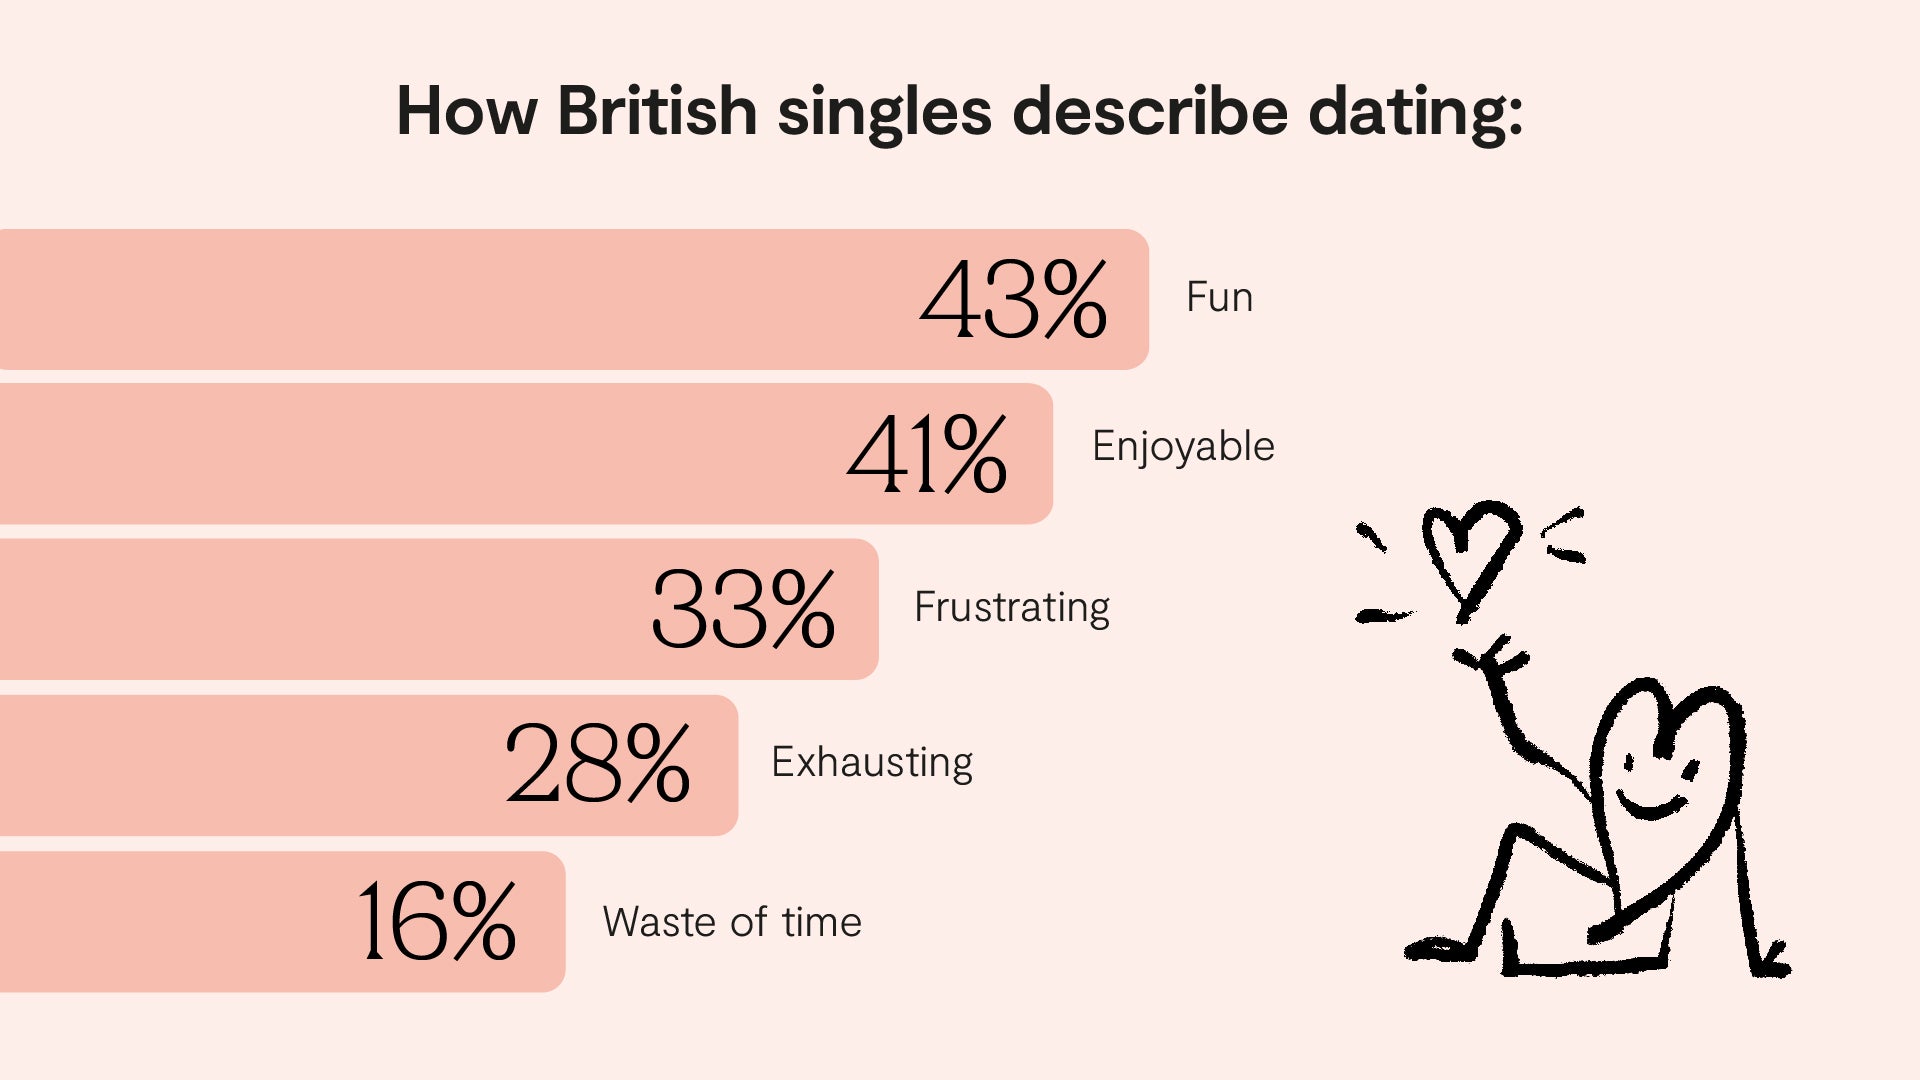 How British singles currently describe their dating experience